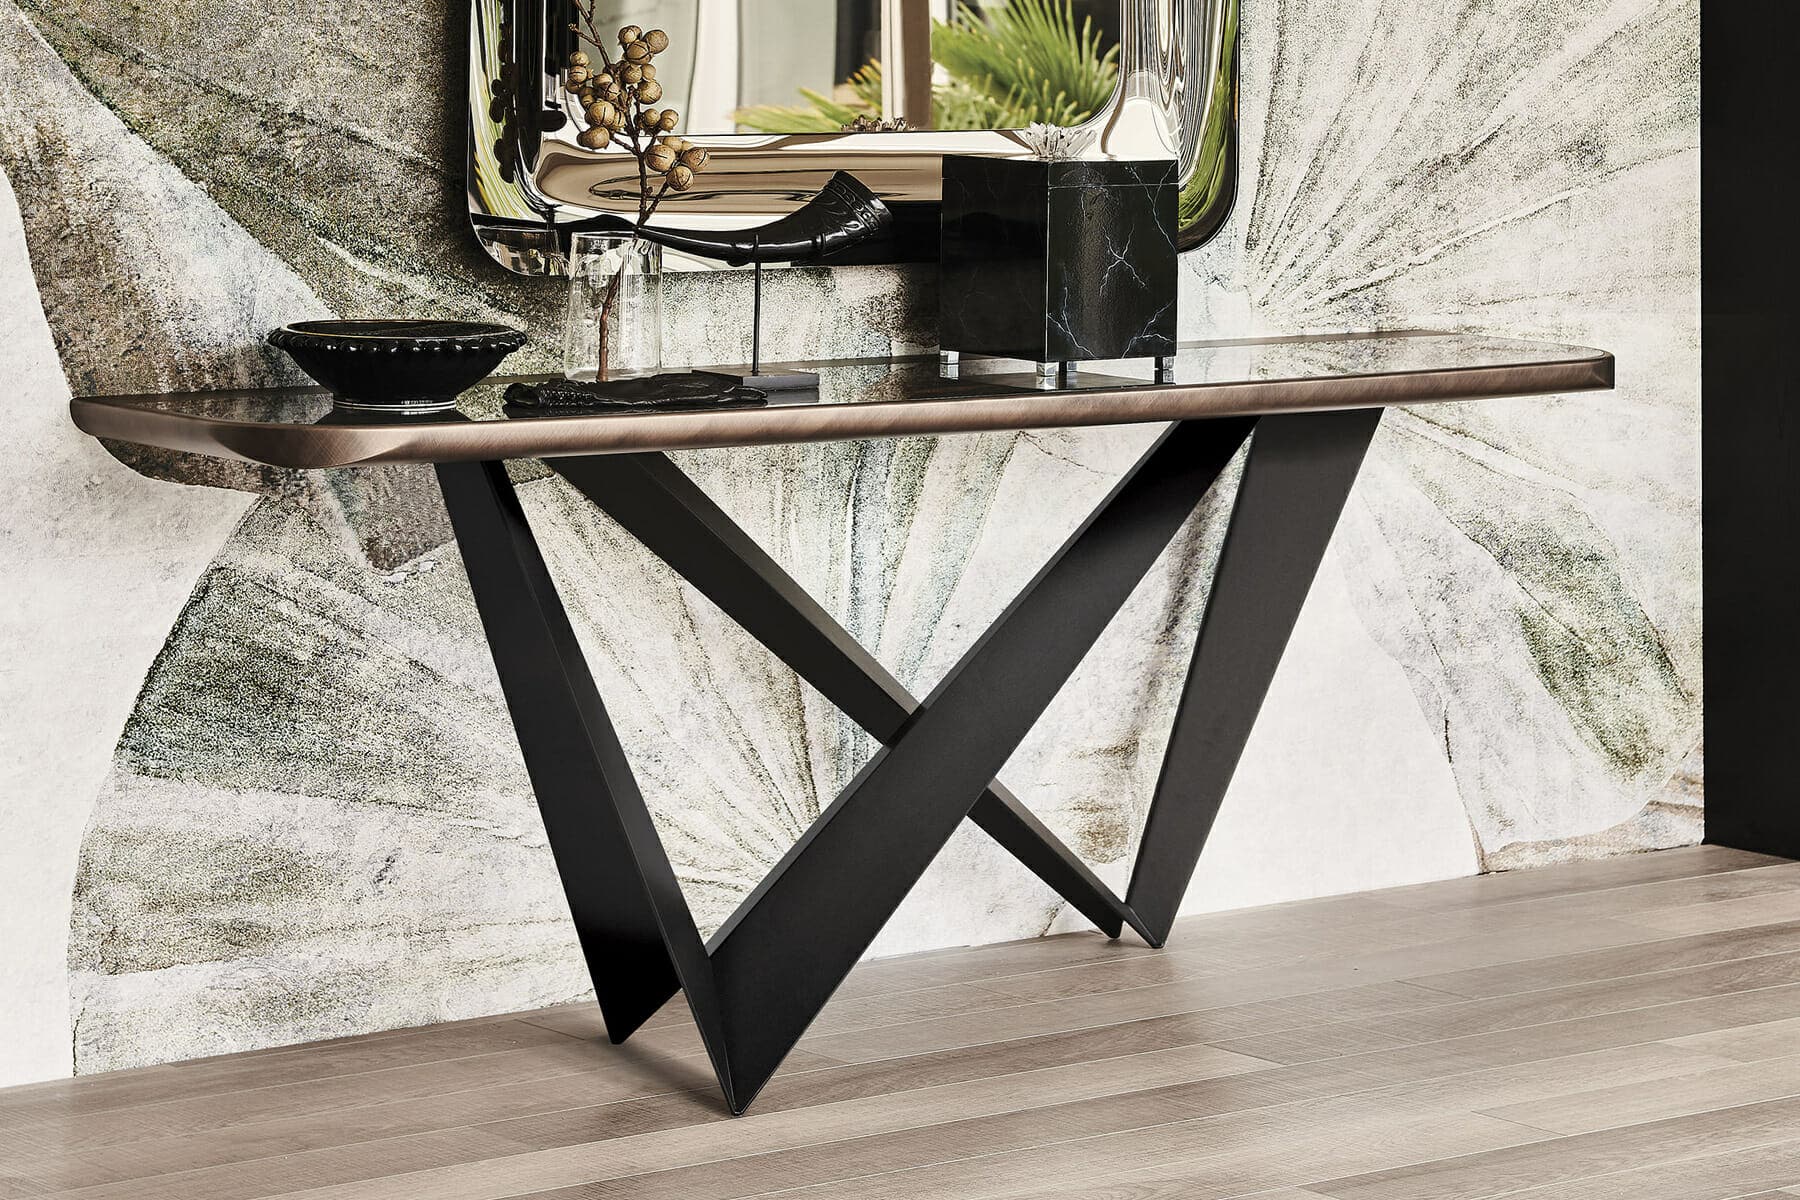 High-Quality Sofa Table for modern home interior design style in Utah